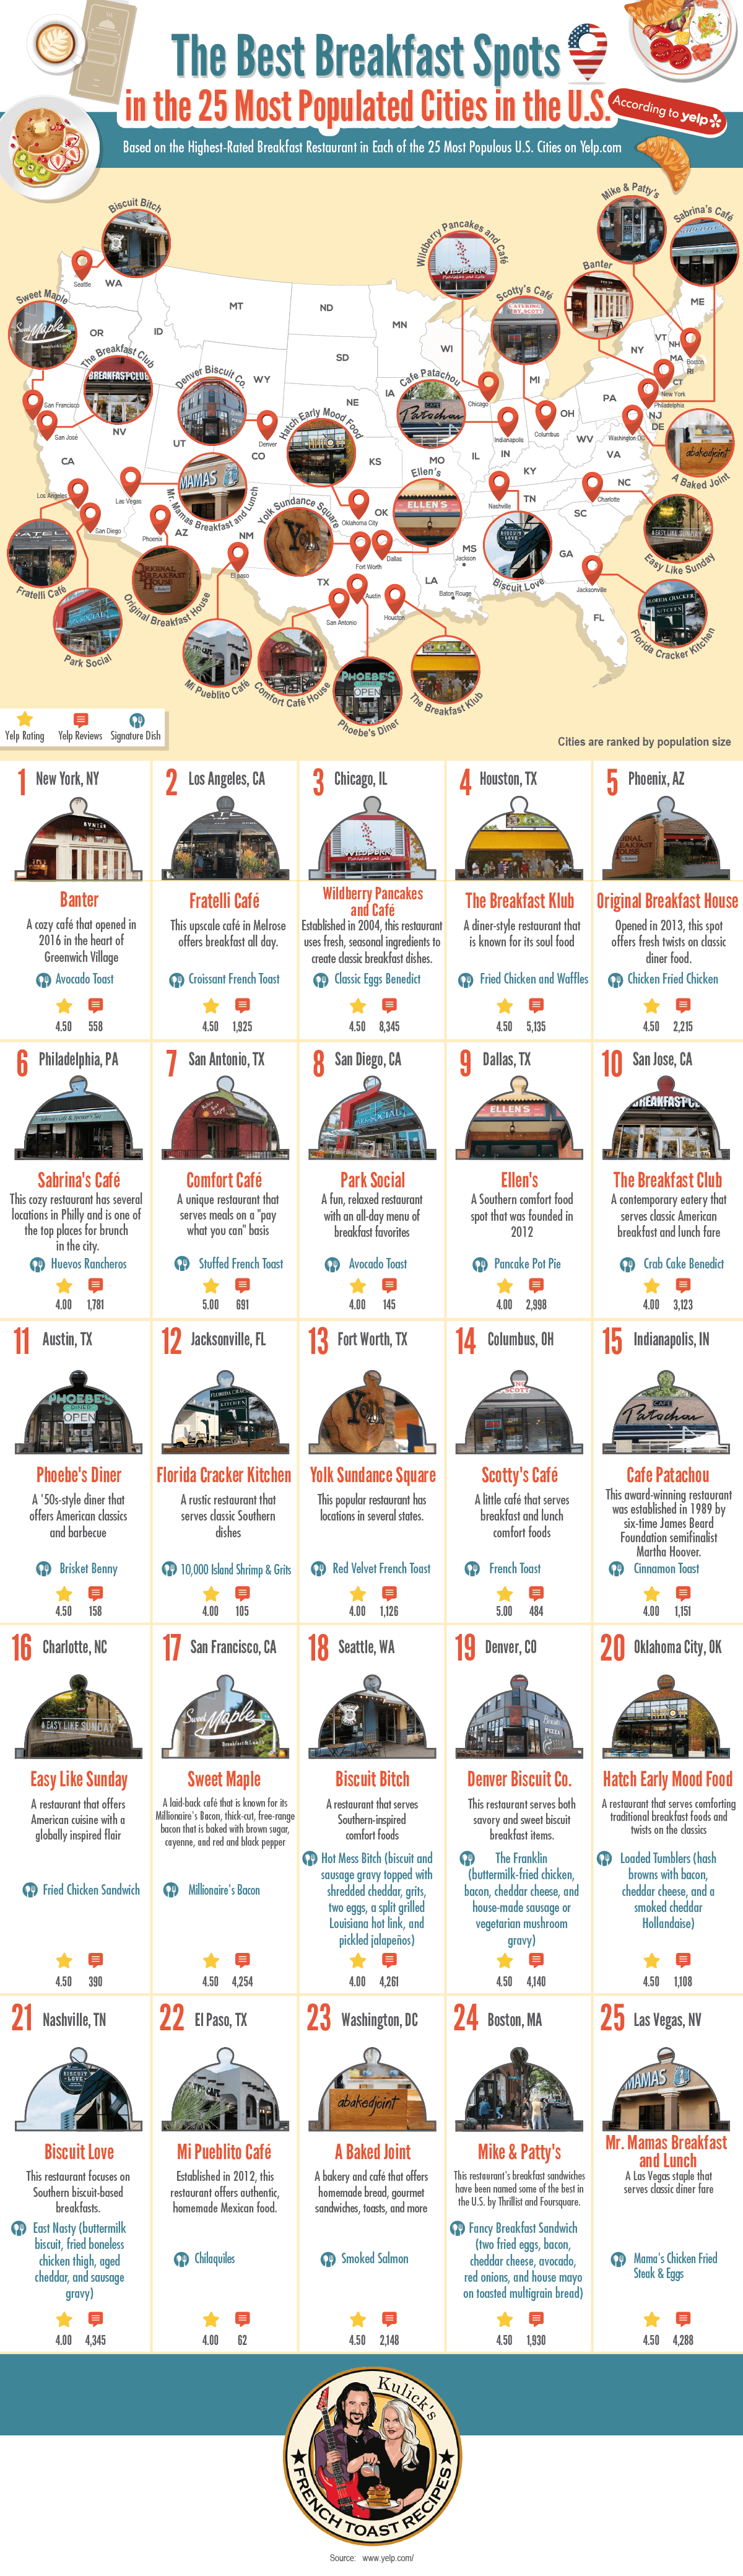 The Best Breakfast Spot in the 25 Most Populated Cities in the U.S. According to Yelp - Kulick's French Toast Recipes - Infographic